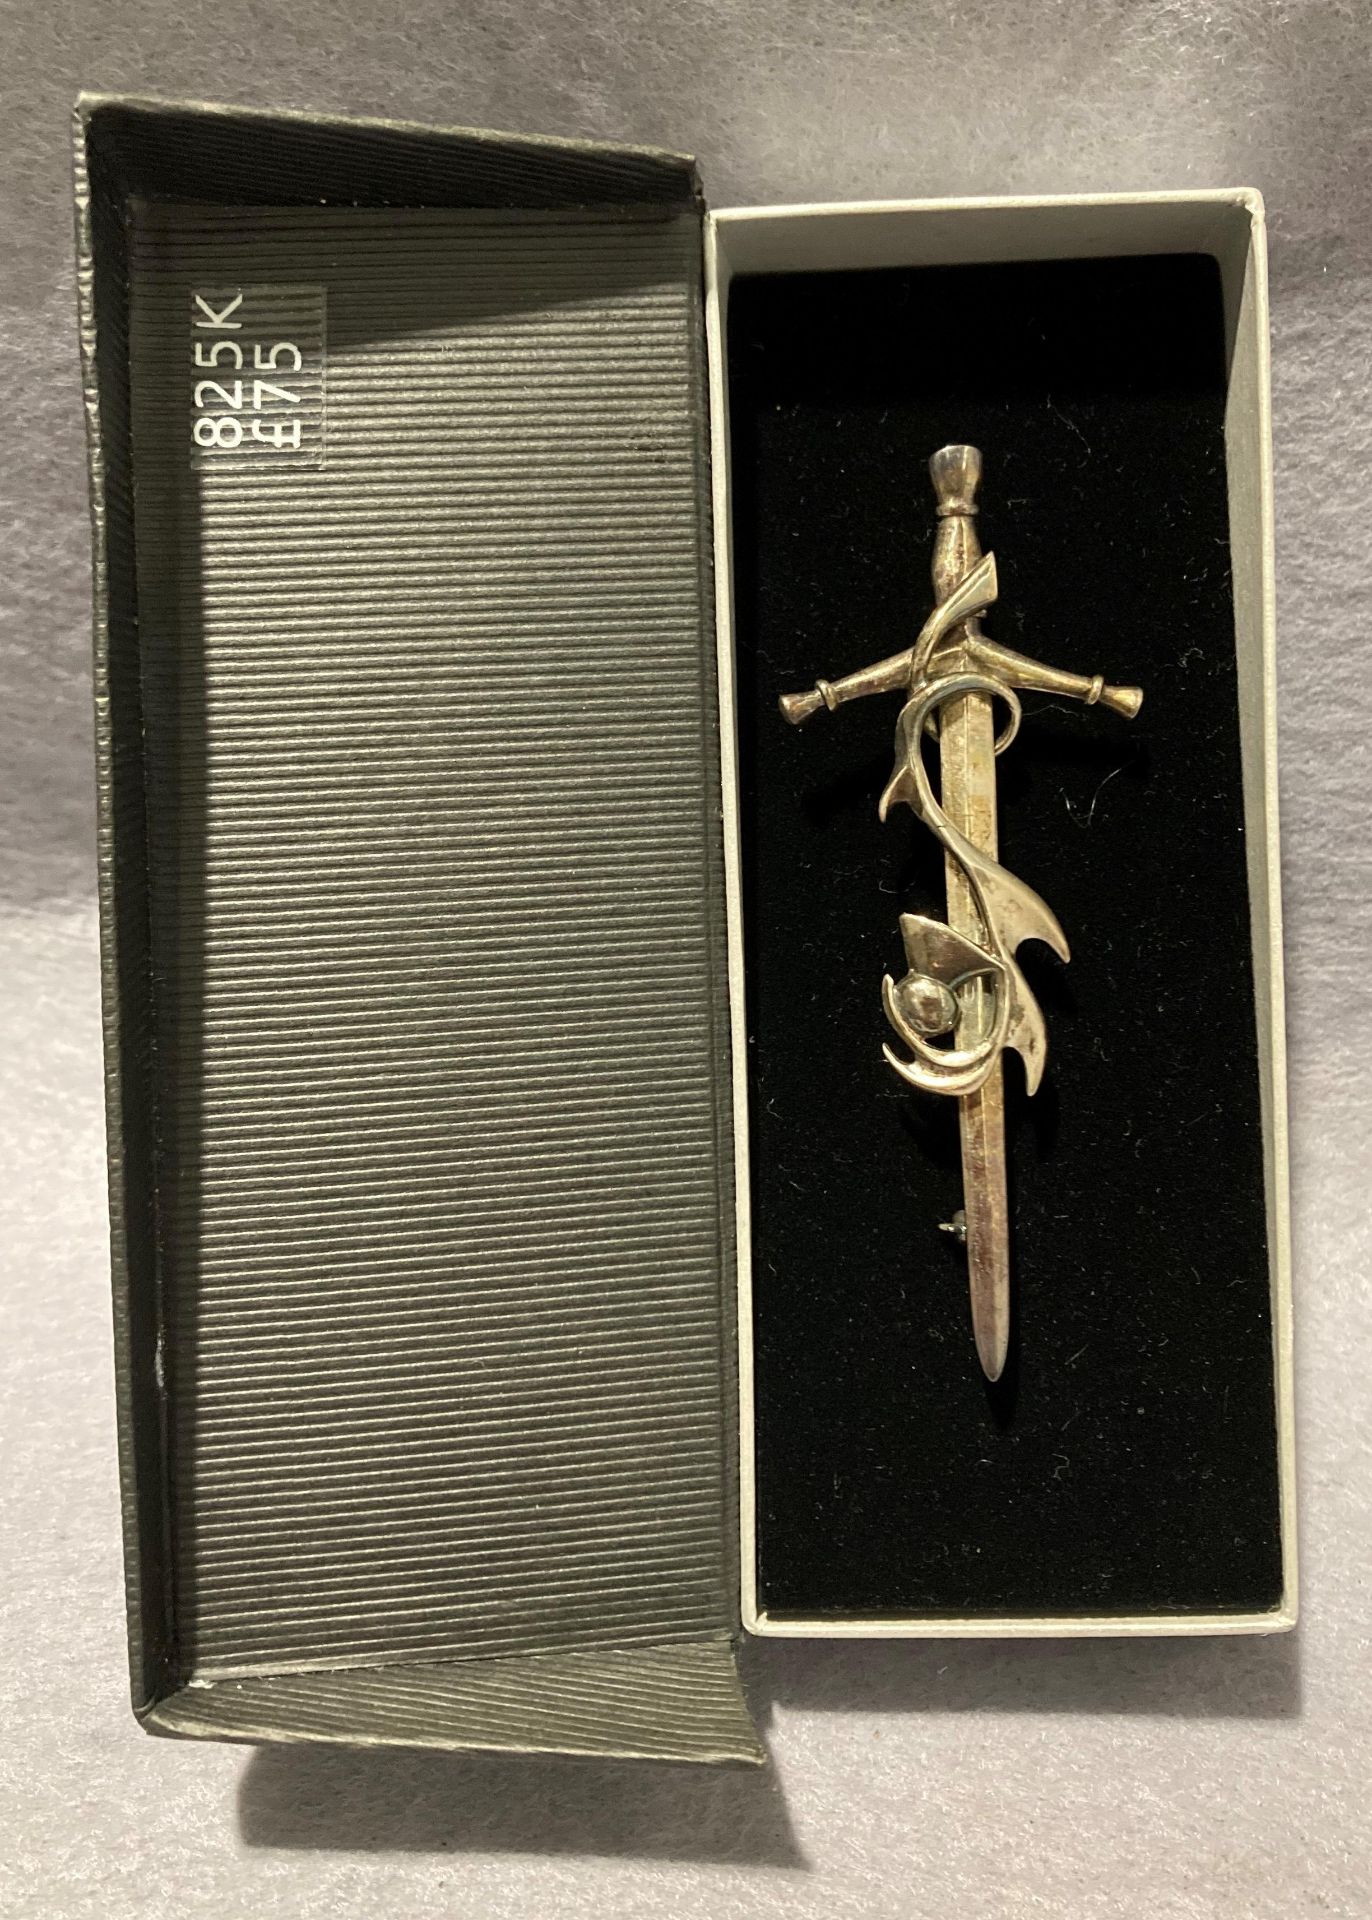 Solid silver hallmark sword with entwined thistle Scottish kilt pin (9.